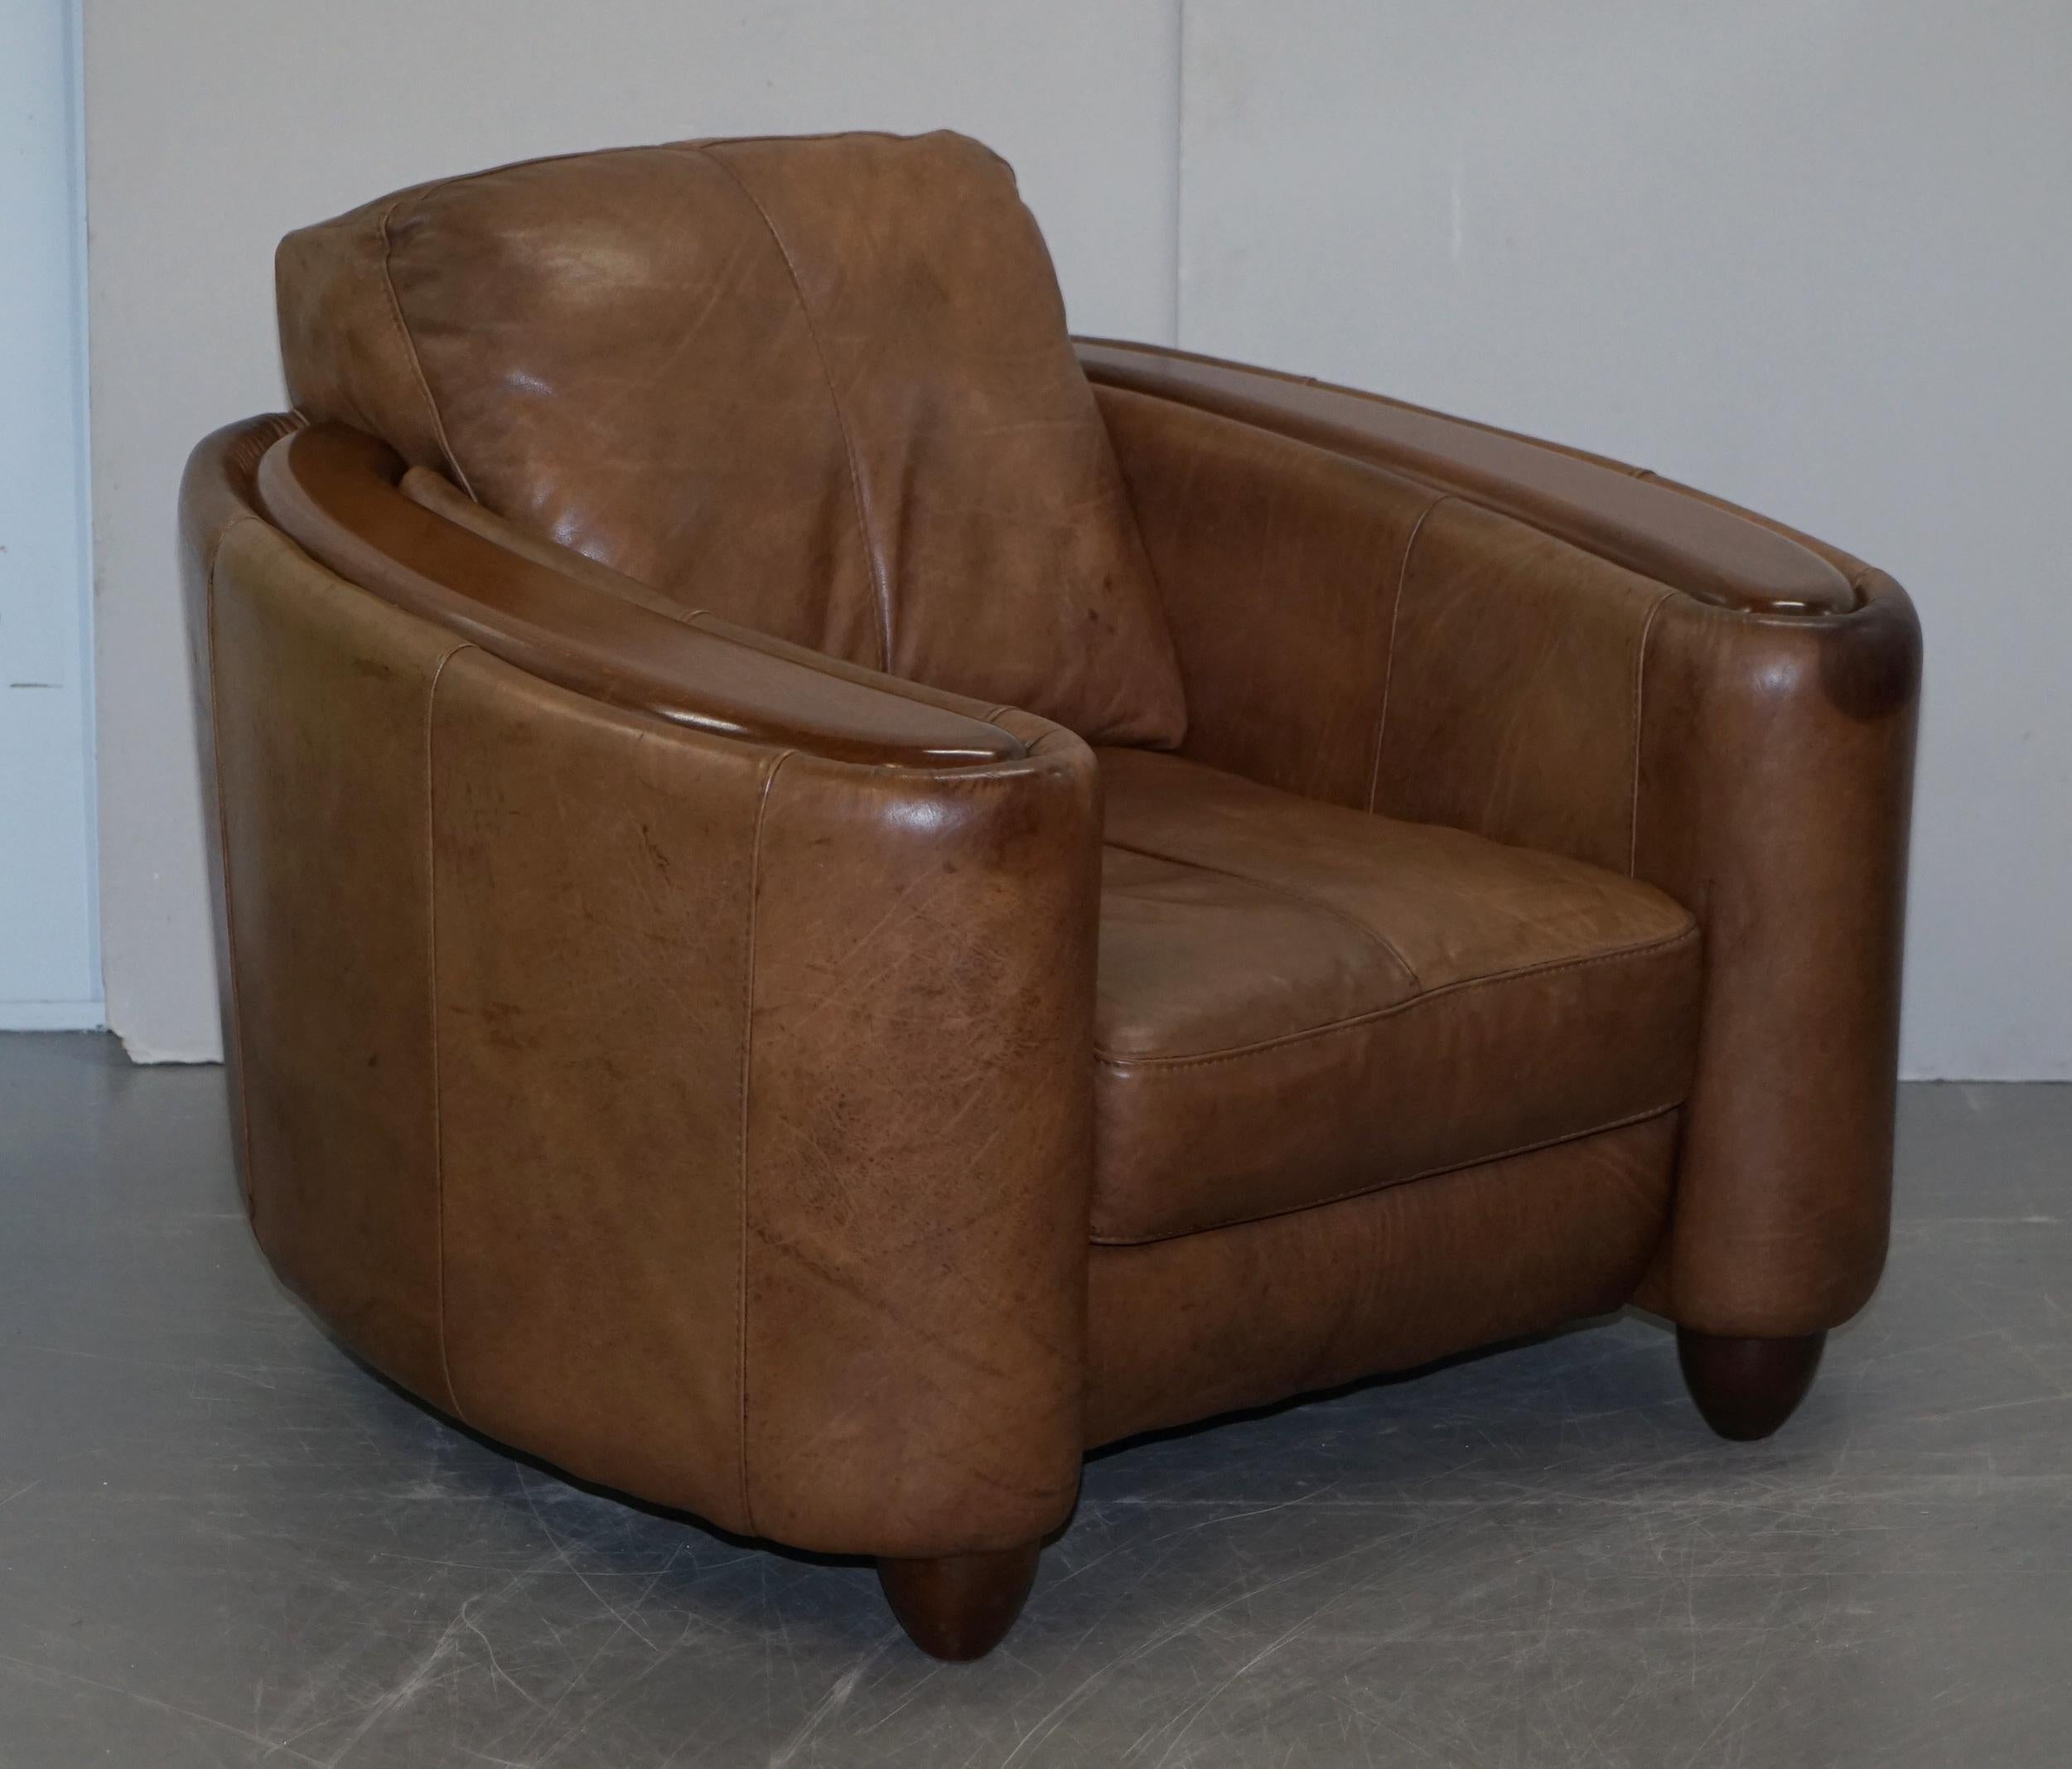 We are delighted to offer for sale this lovely pair of vintage Art Deco style aged brown leather club armchairs with polished mahogany arms

These are very stylish, exceptionally comfortable and well made, the leather is fully aniline which is